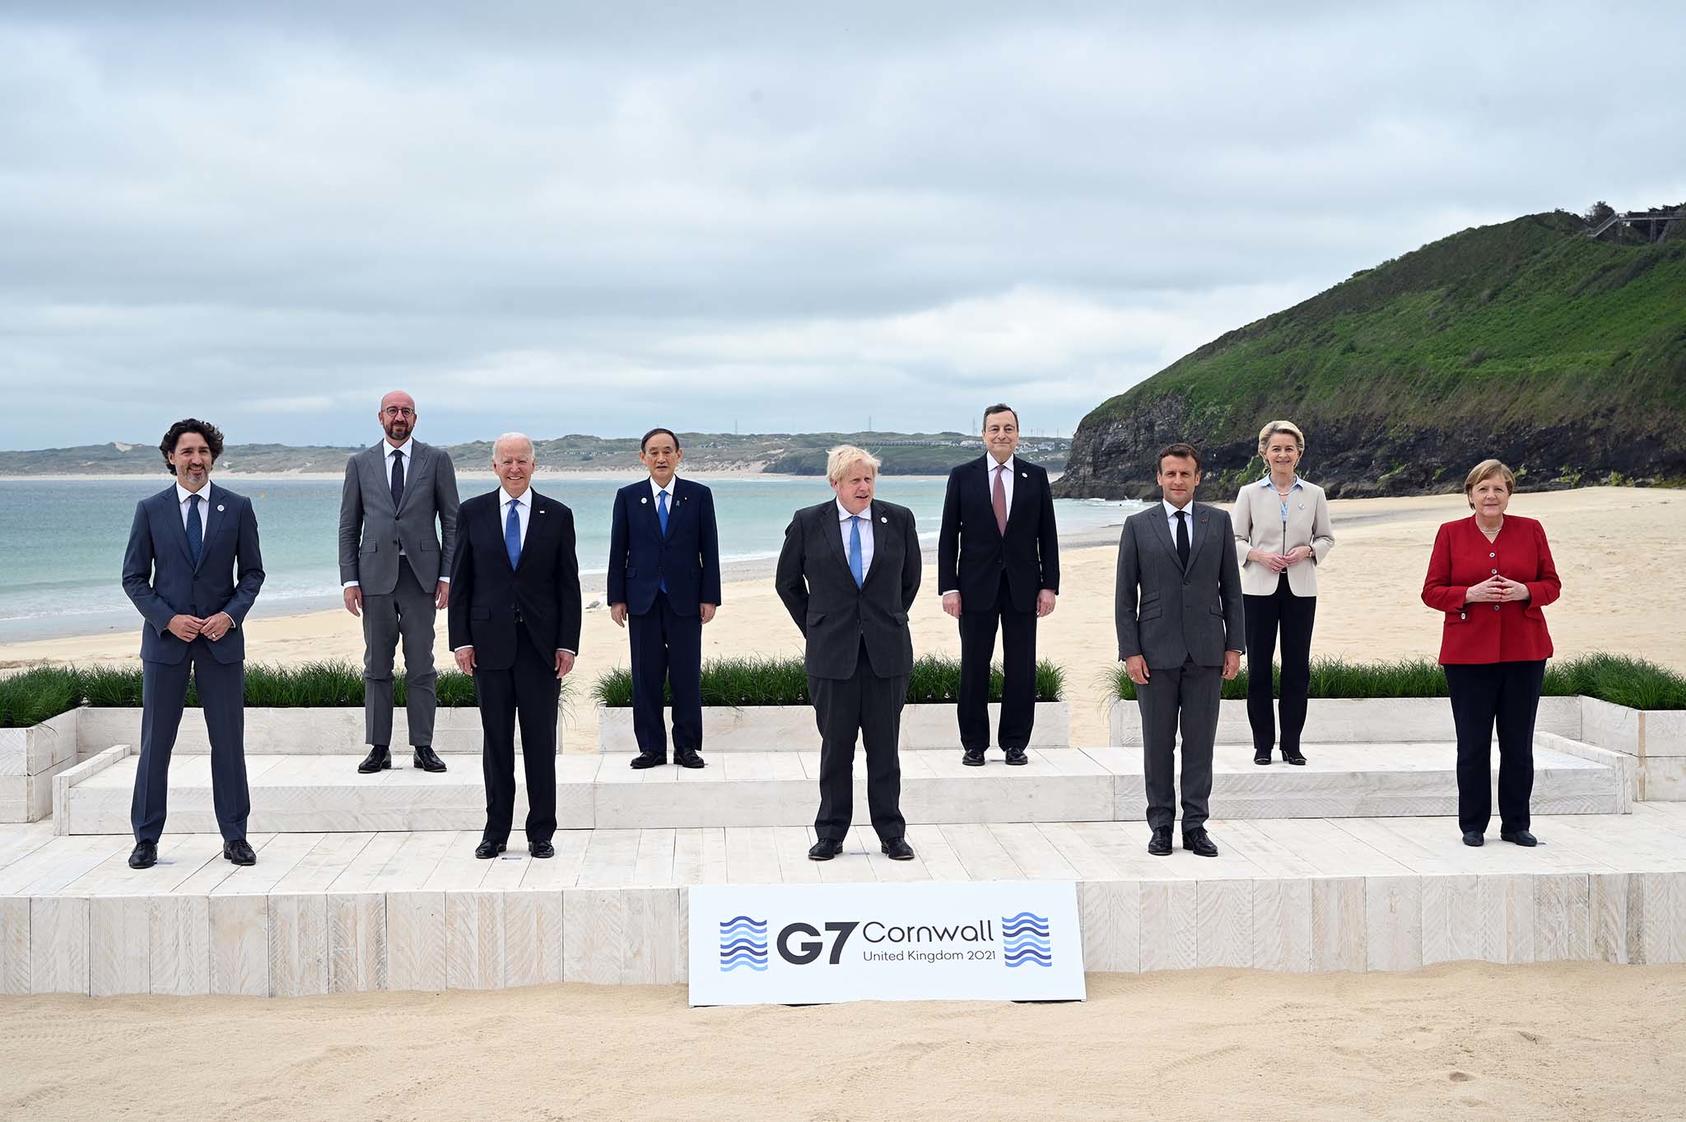 G-7 leaders the 2021 summit In Carbis Bay, England on June 11, 2021. (Leon Neal/Pool via The New York Times)